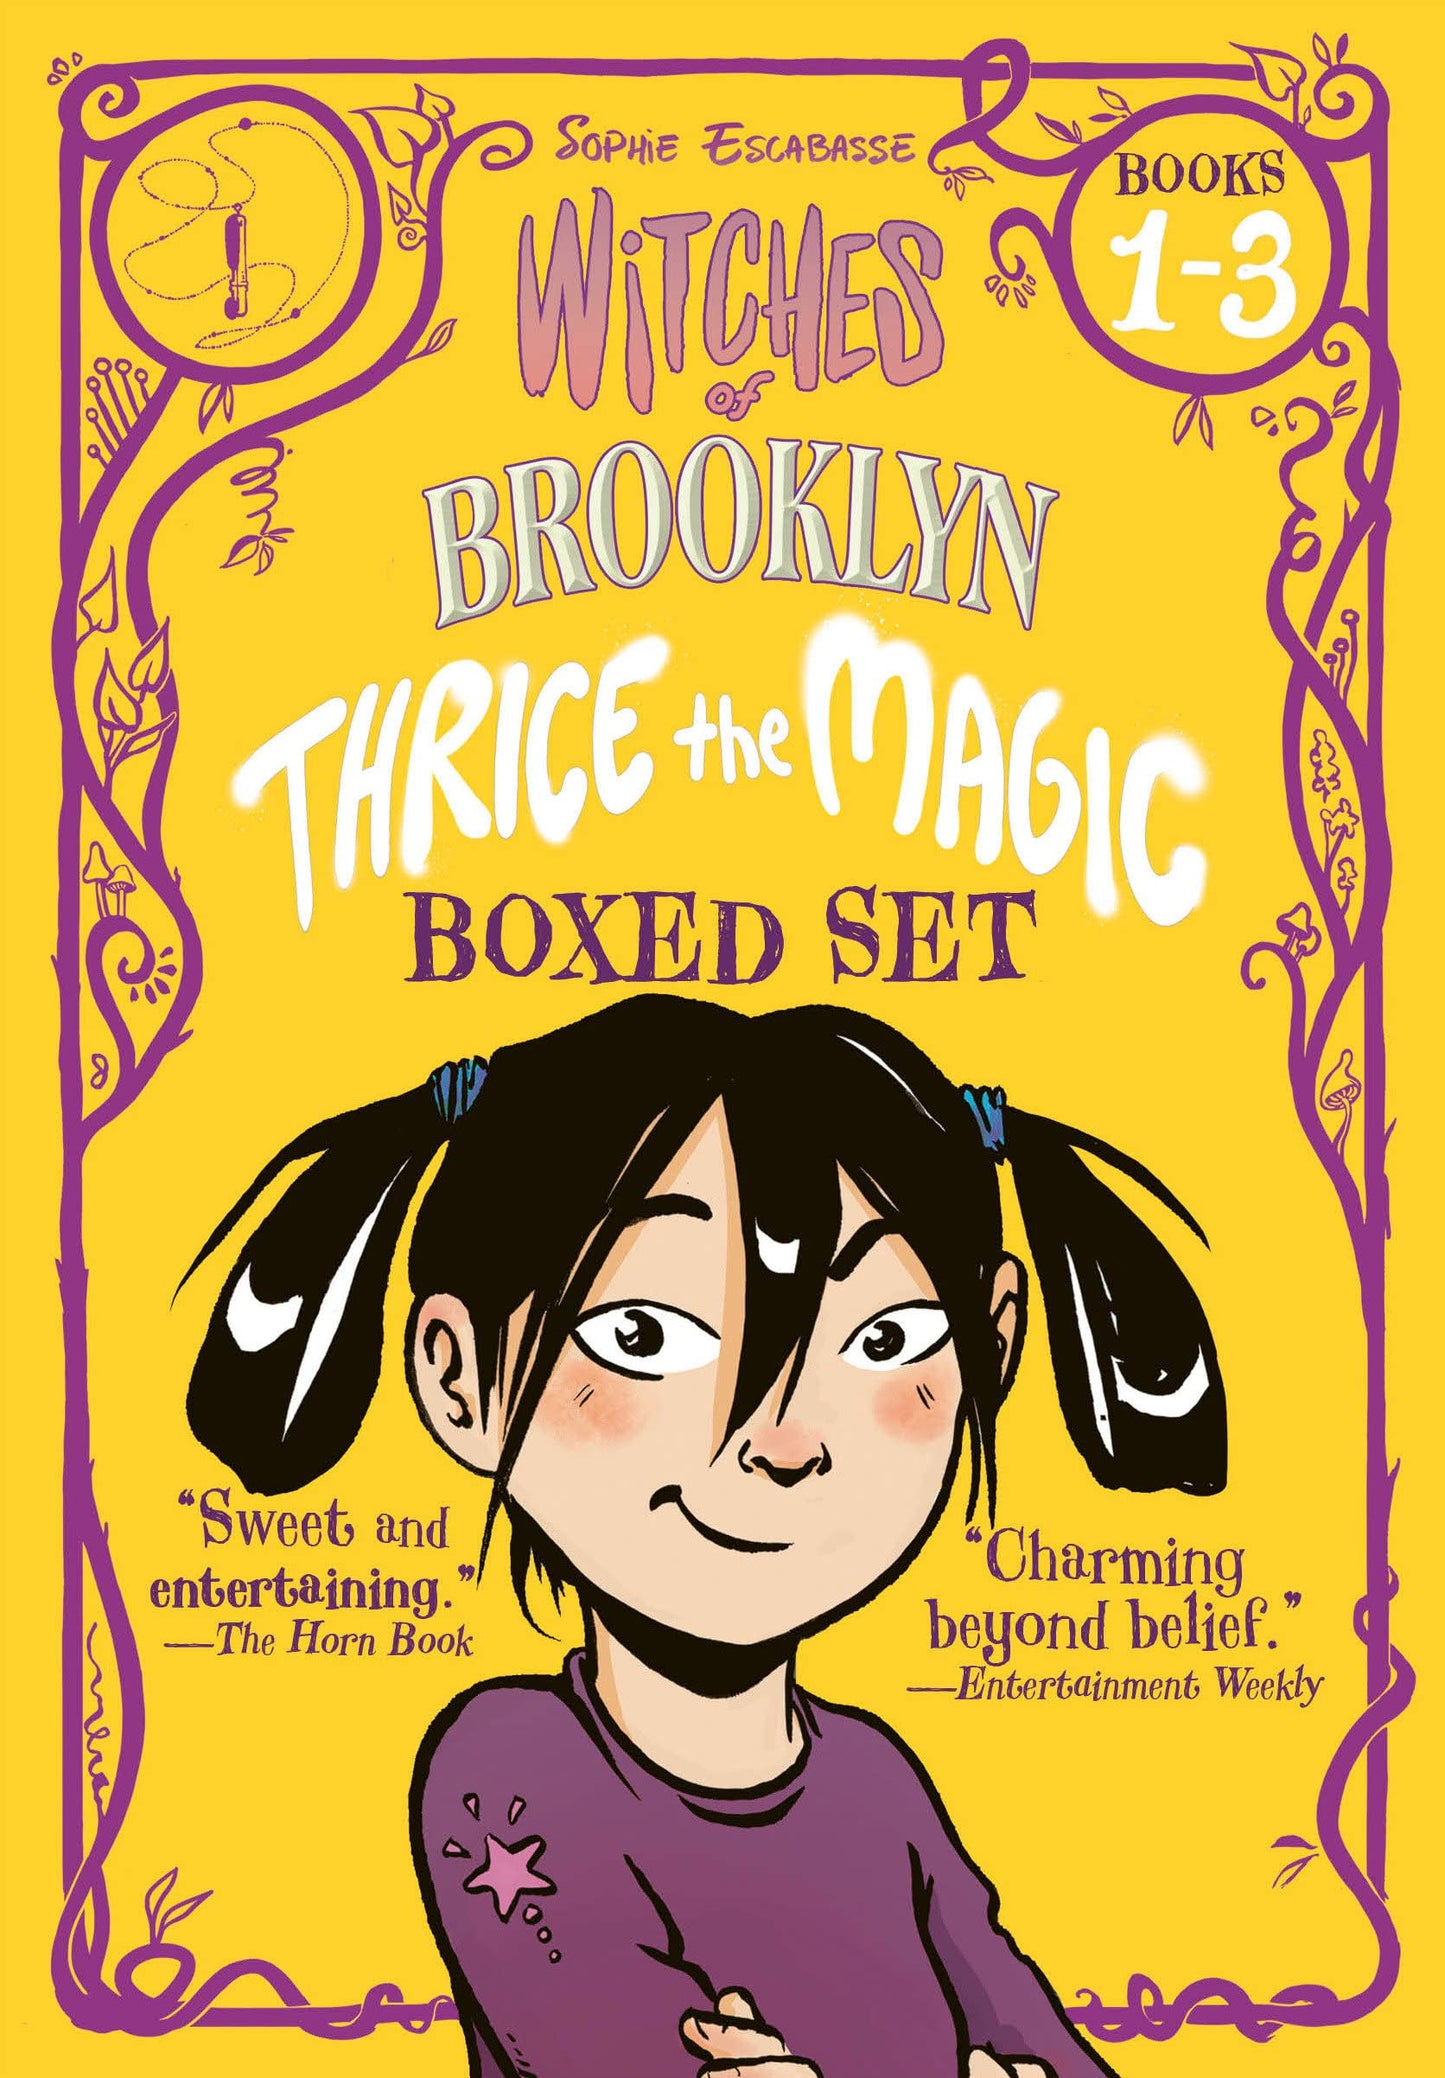 Witches of Brooklyn: Thrice the Magic Boxed Set (Books 1-3): Witches of Brooklyn, What the Hex?!, S'More Magic